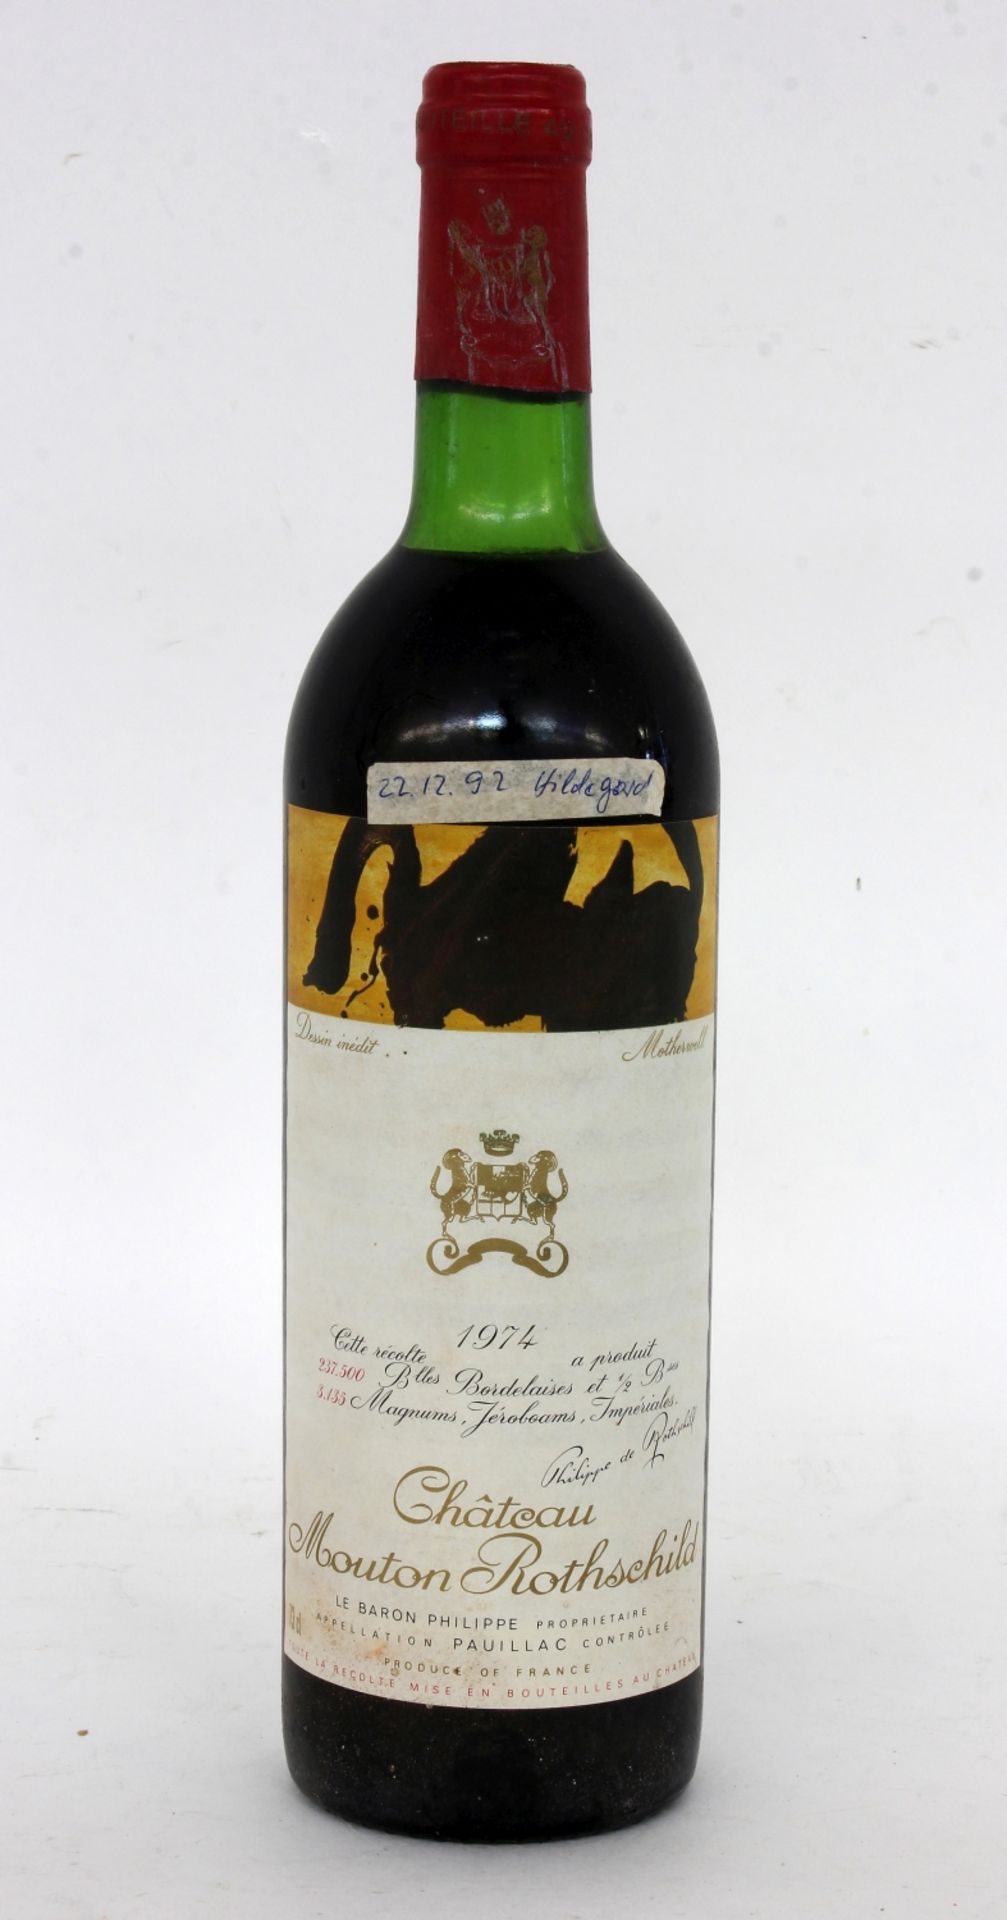 CHÂTEAU MOUTON ROTHSCHILD 1974 - Image 2 of 2